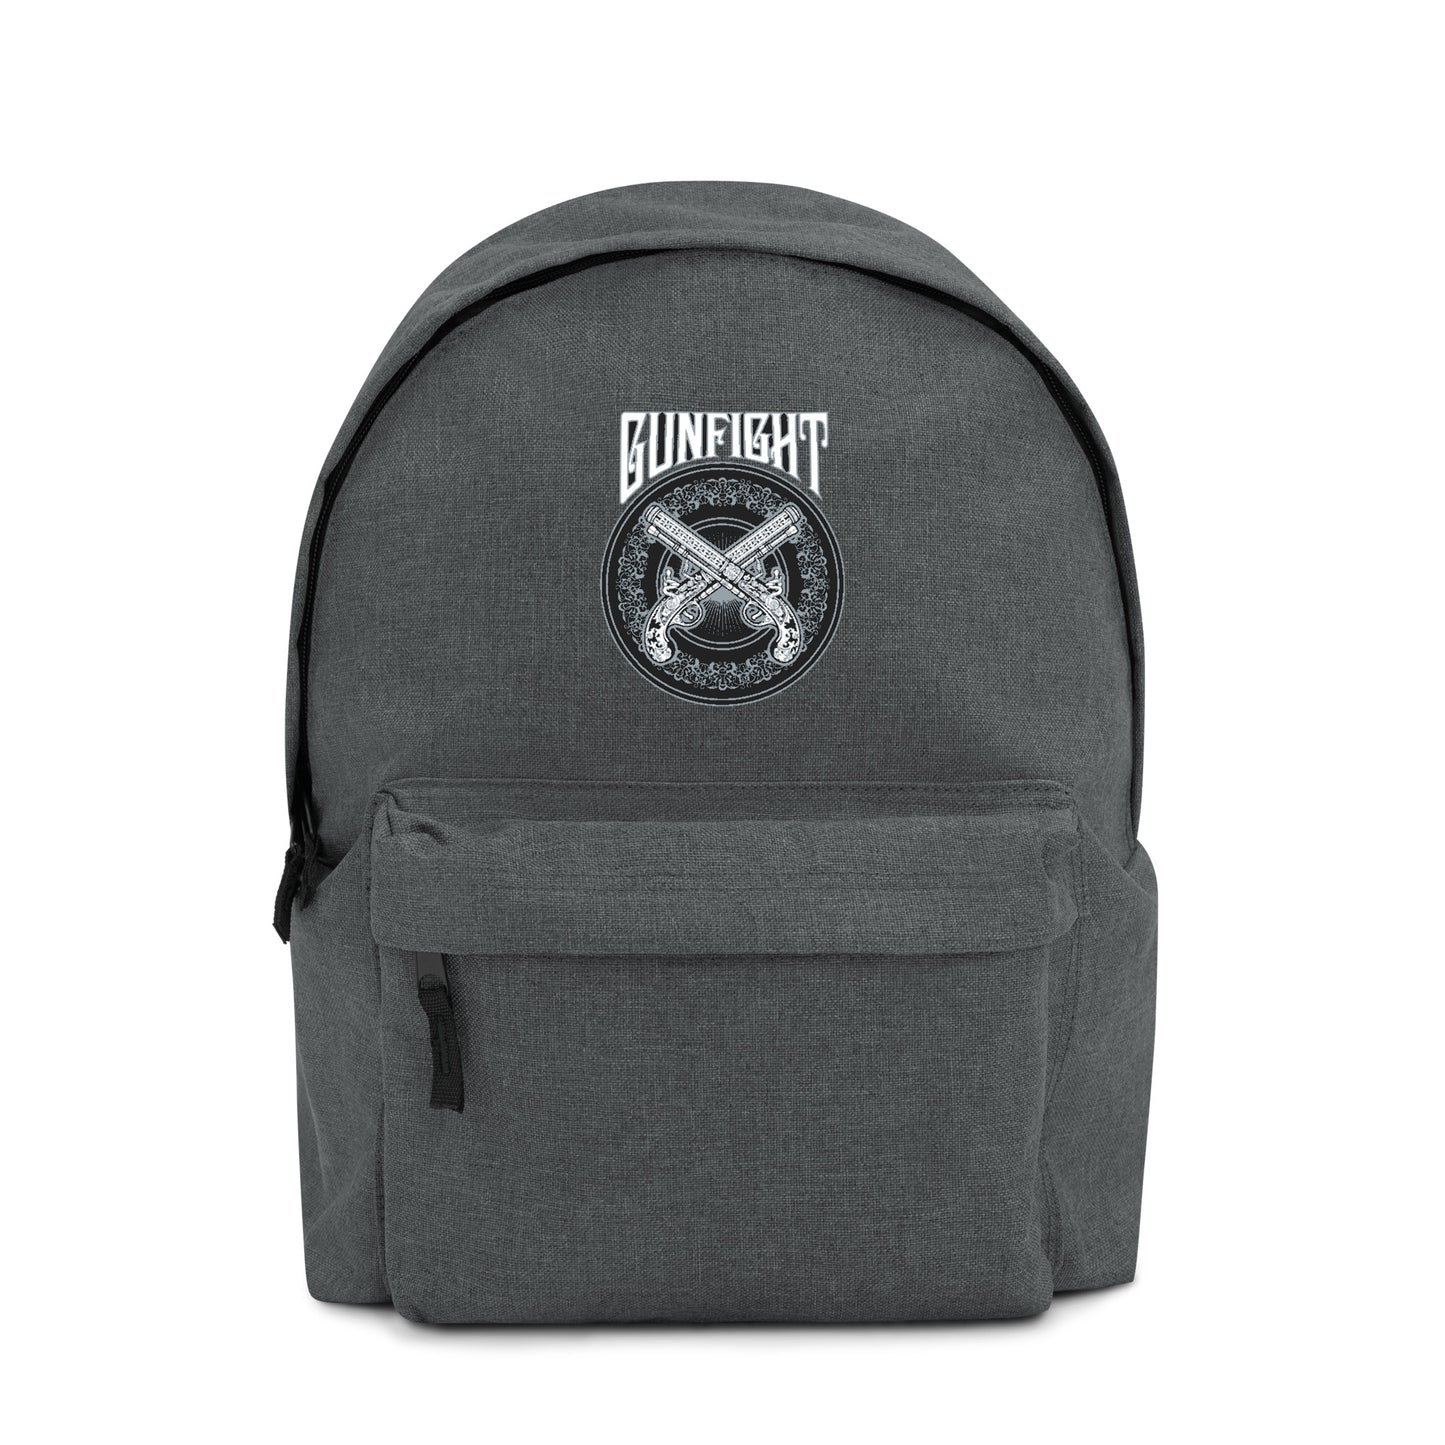 GunFight Embroidered Backpack